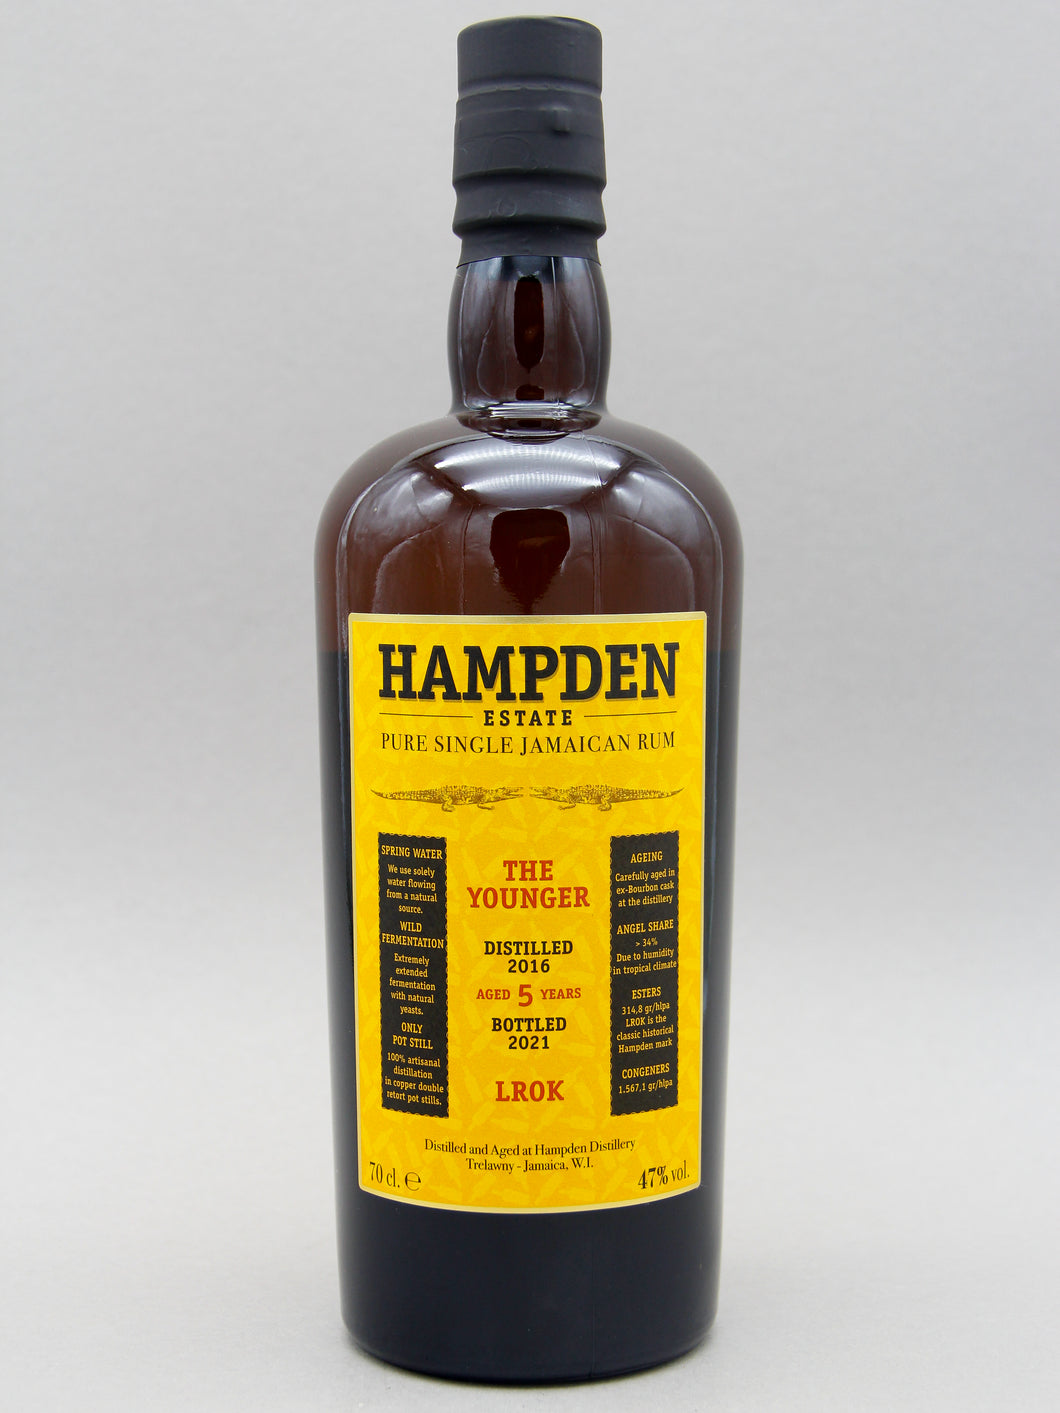 Hampden Estate, The Younger, Aged 5 Years, Jamaica, LROK (47%, 70cl)